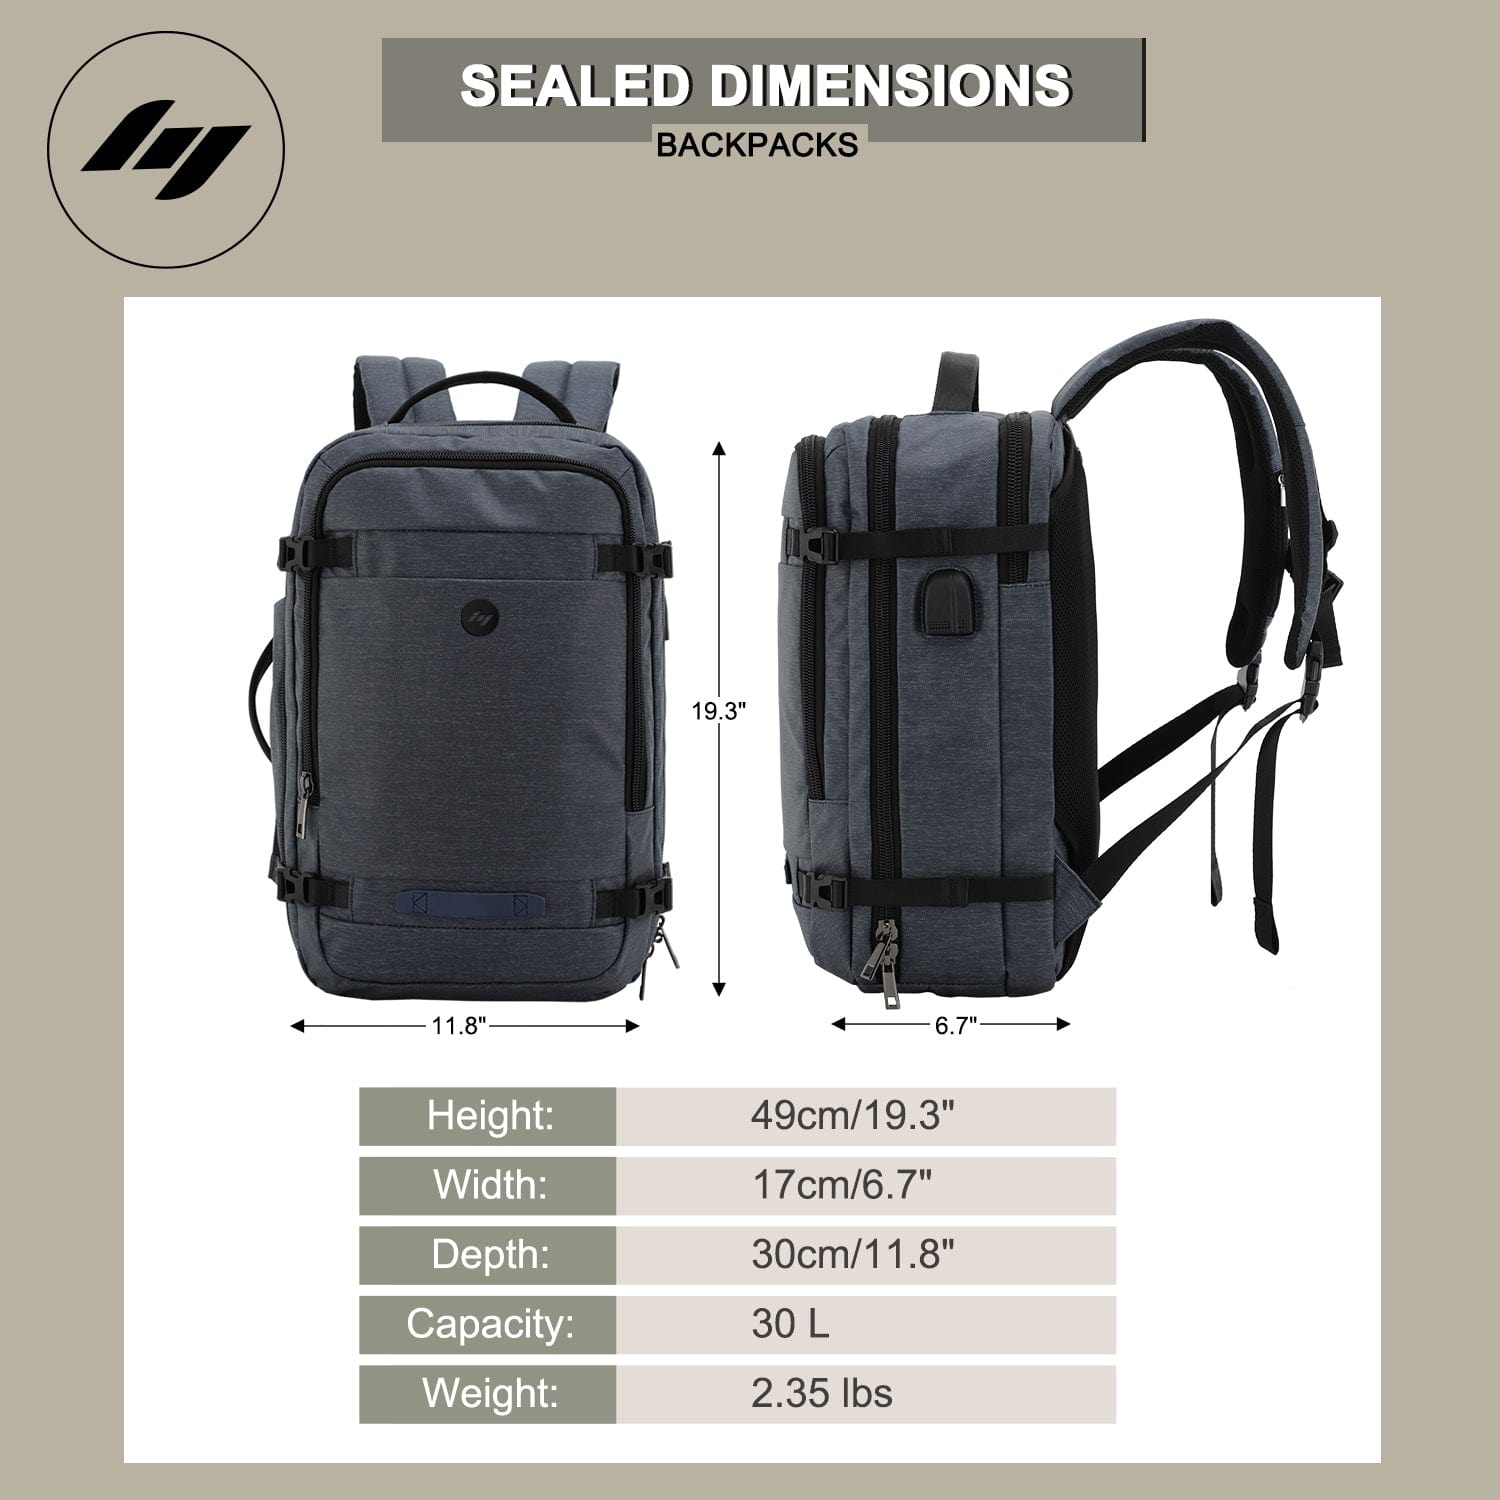 Carry On Daypack with USB Charging Port Backpack Bag Dimgray Mier Sports